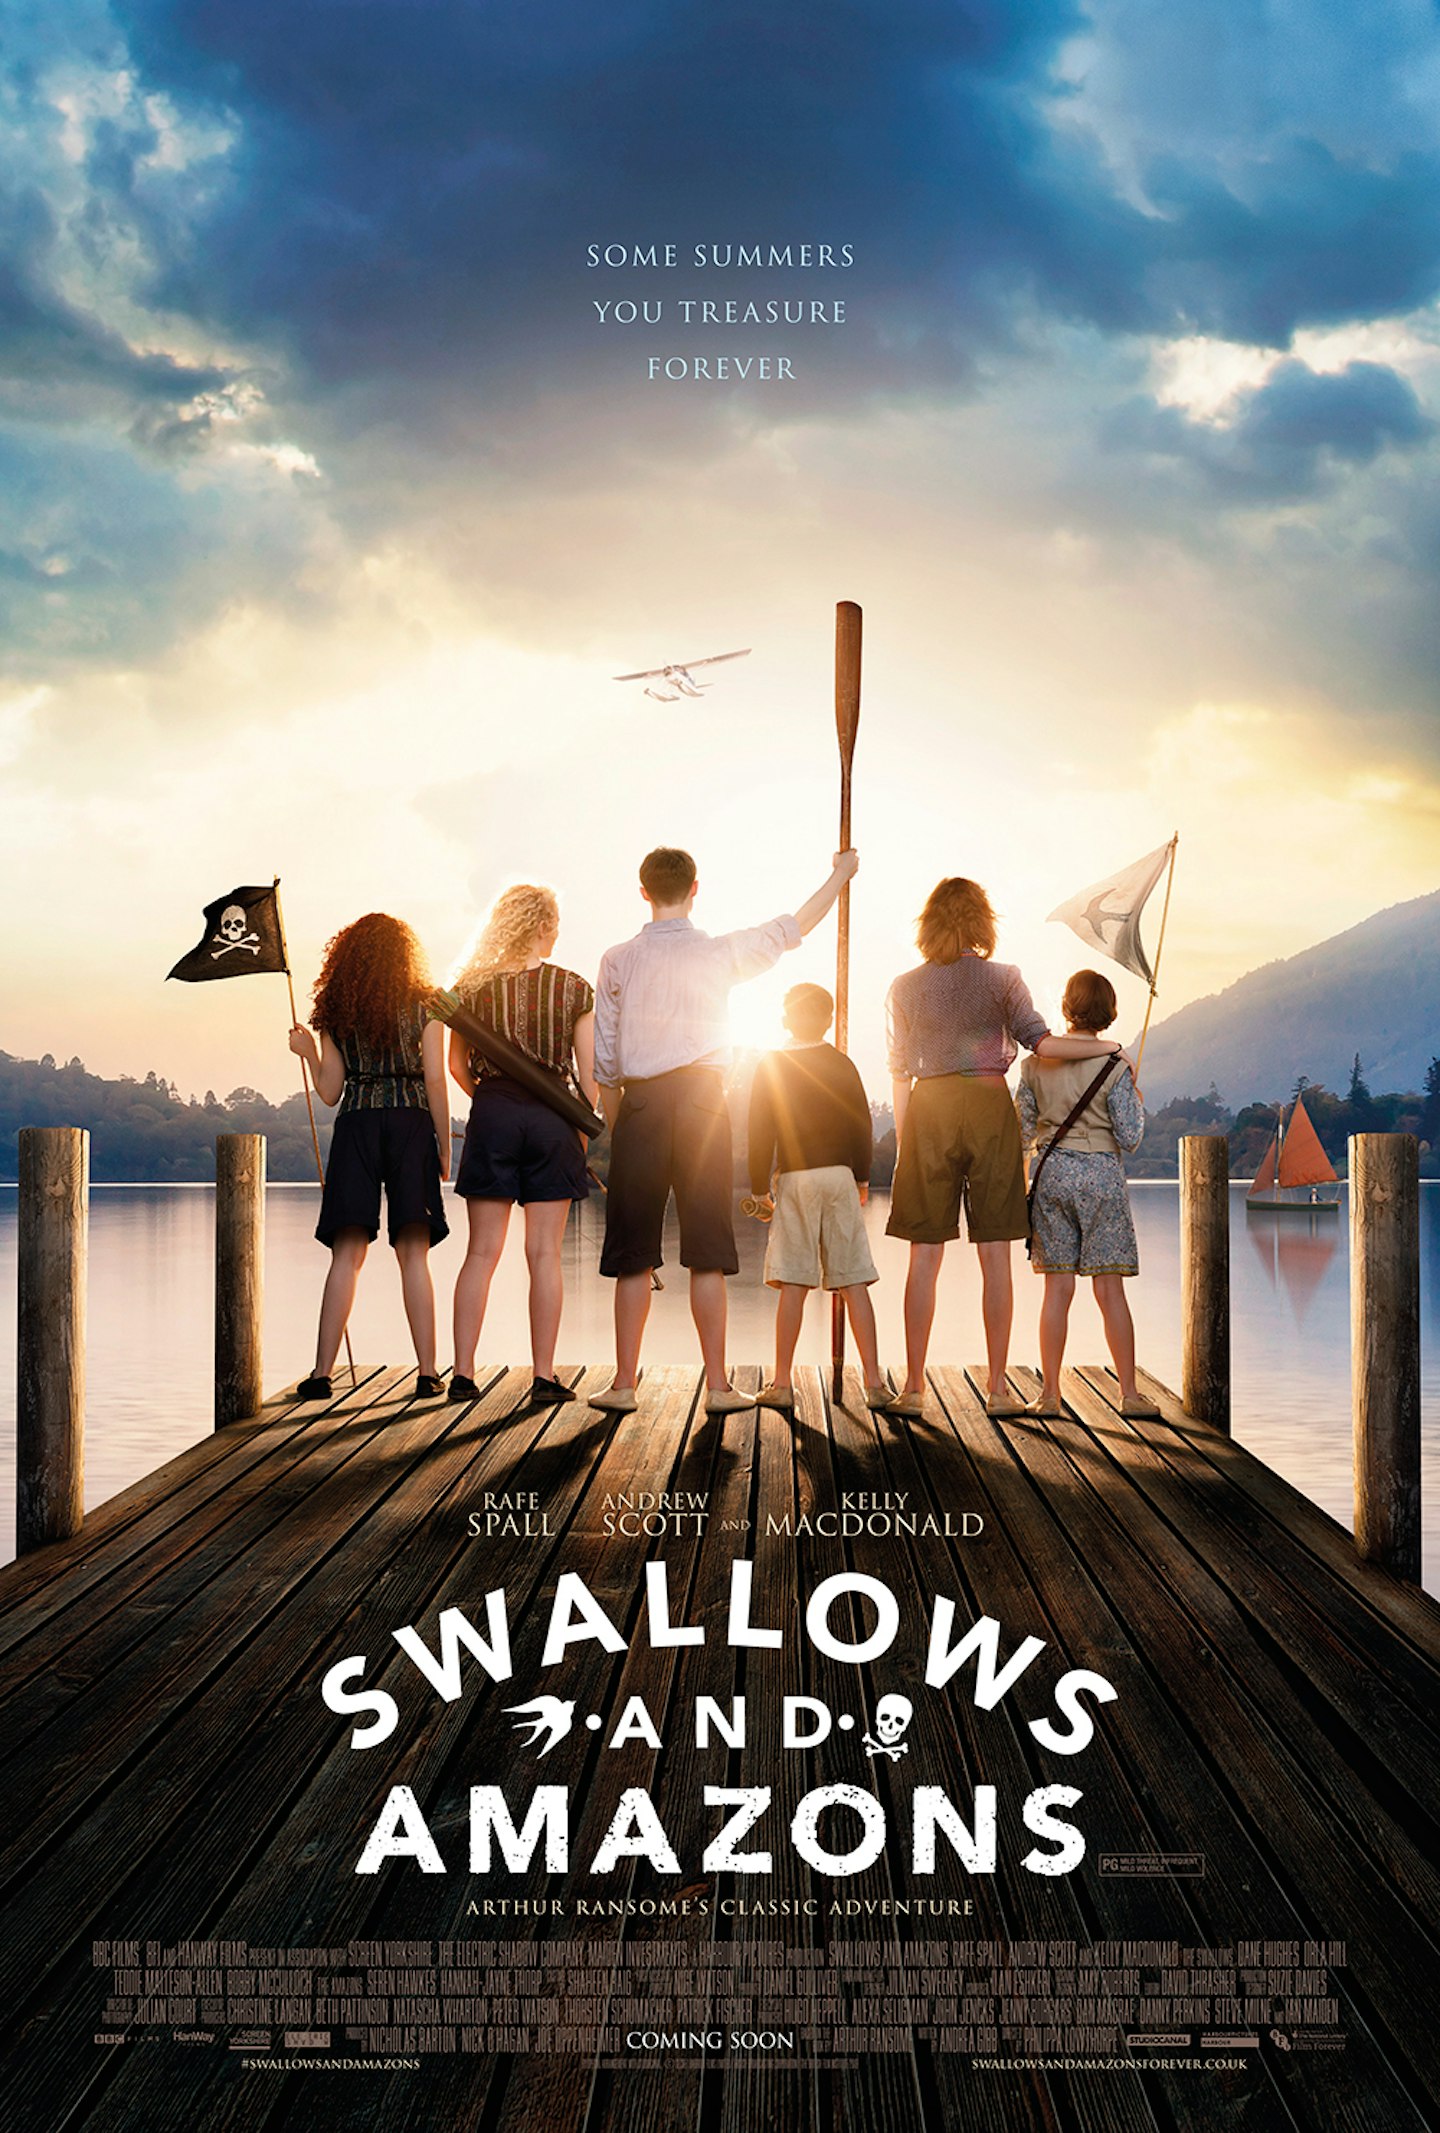 New Swallows And Amazons poster